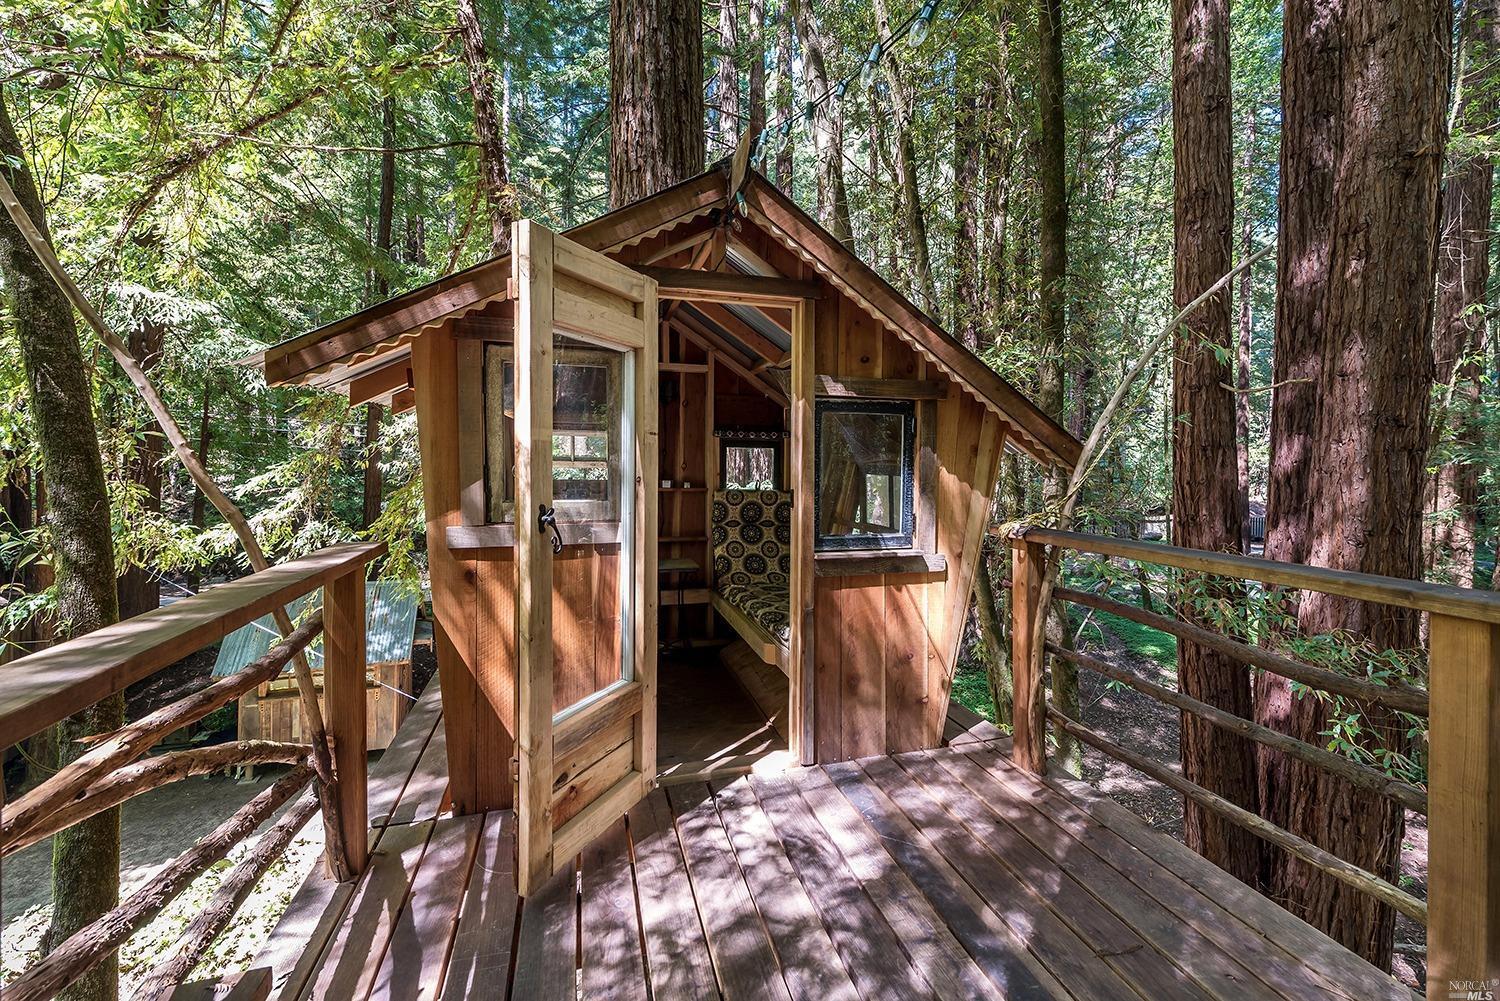 Tiny Redwood Cabin and Treehouse with Ziplines!